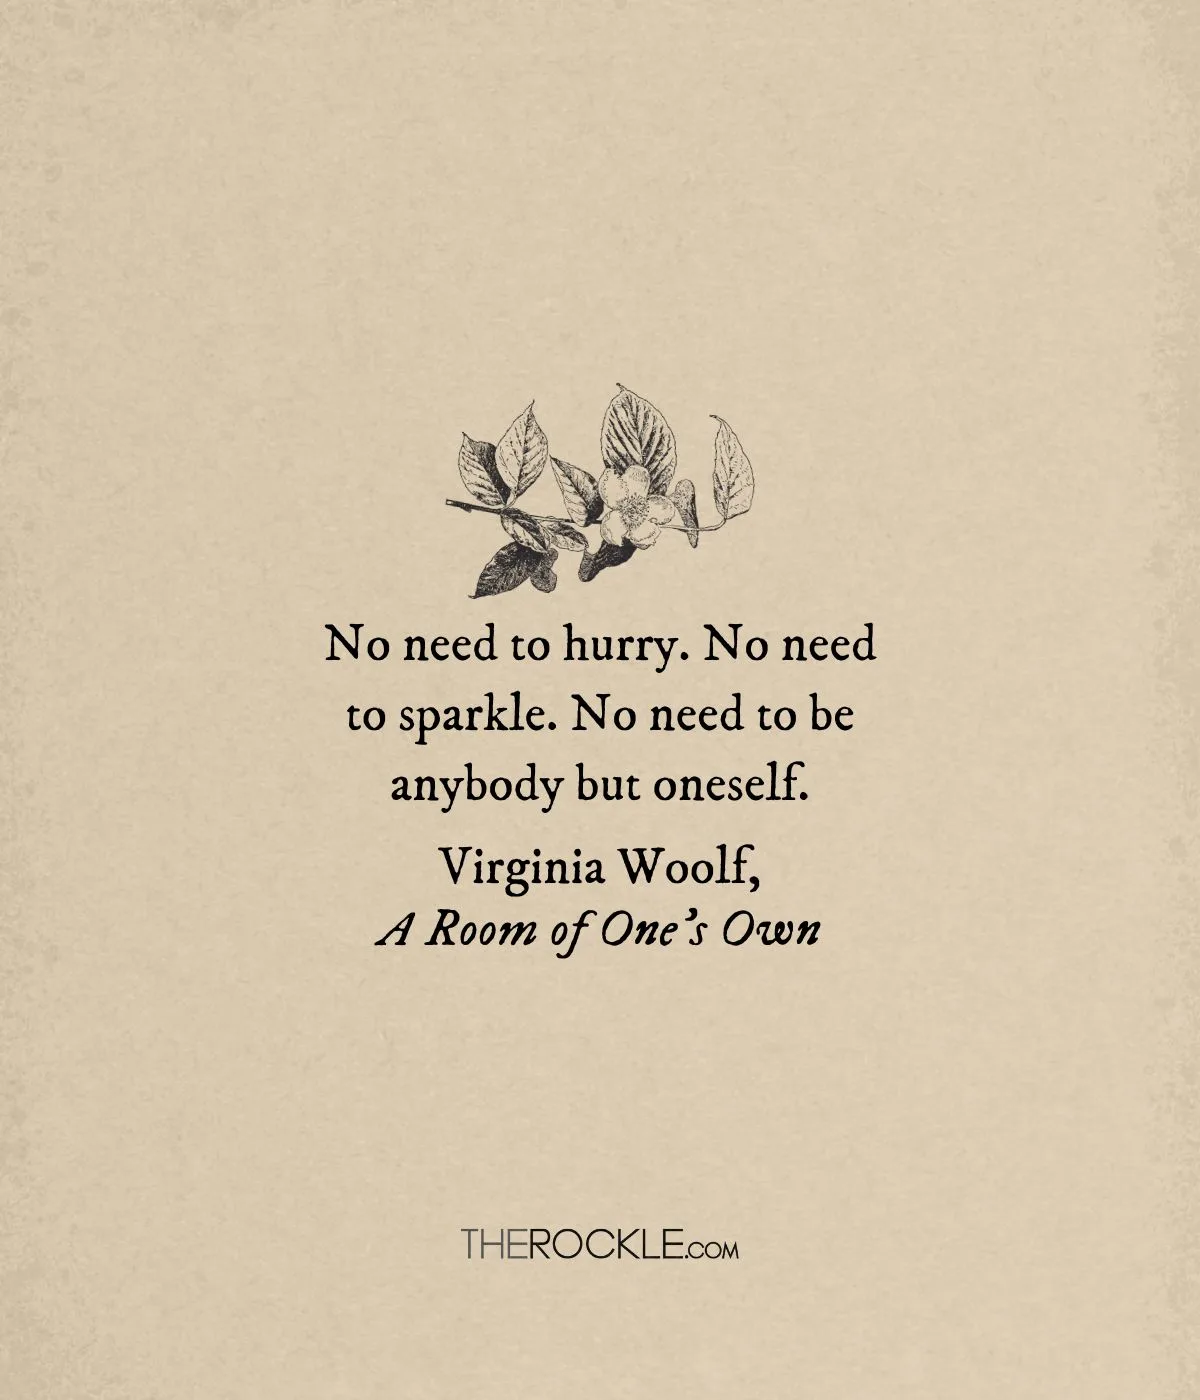 Virginia Woolf quote on self-acceptance